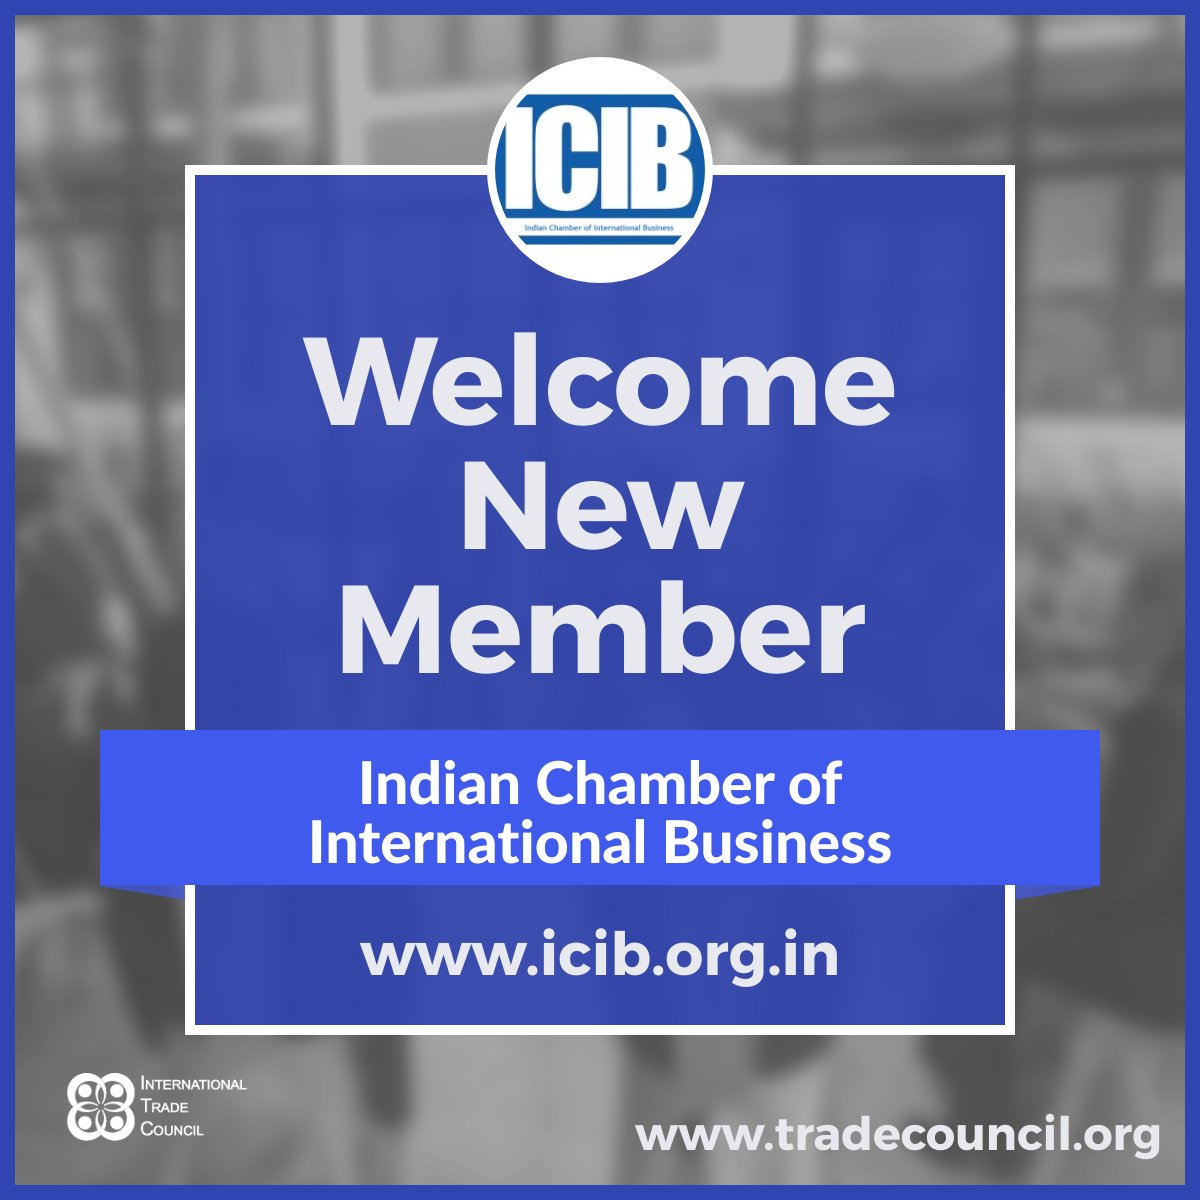 Welcome, Manpreet Singh, President at @ICIBIndia to the International Trade Council. Founded in 2007 by industrial leaders, @ICIBIndia spans 42 countries globally and 12 states in India, supporting MSMEs. Contact us for business growth.